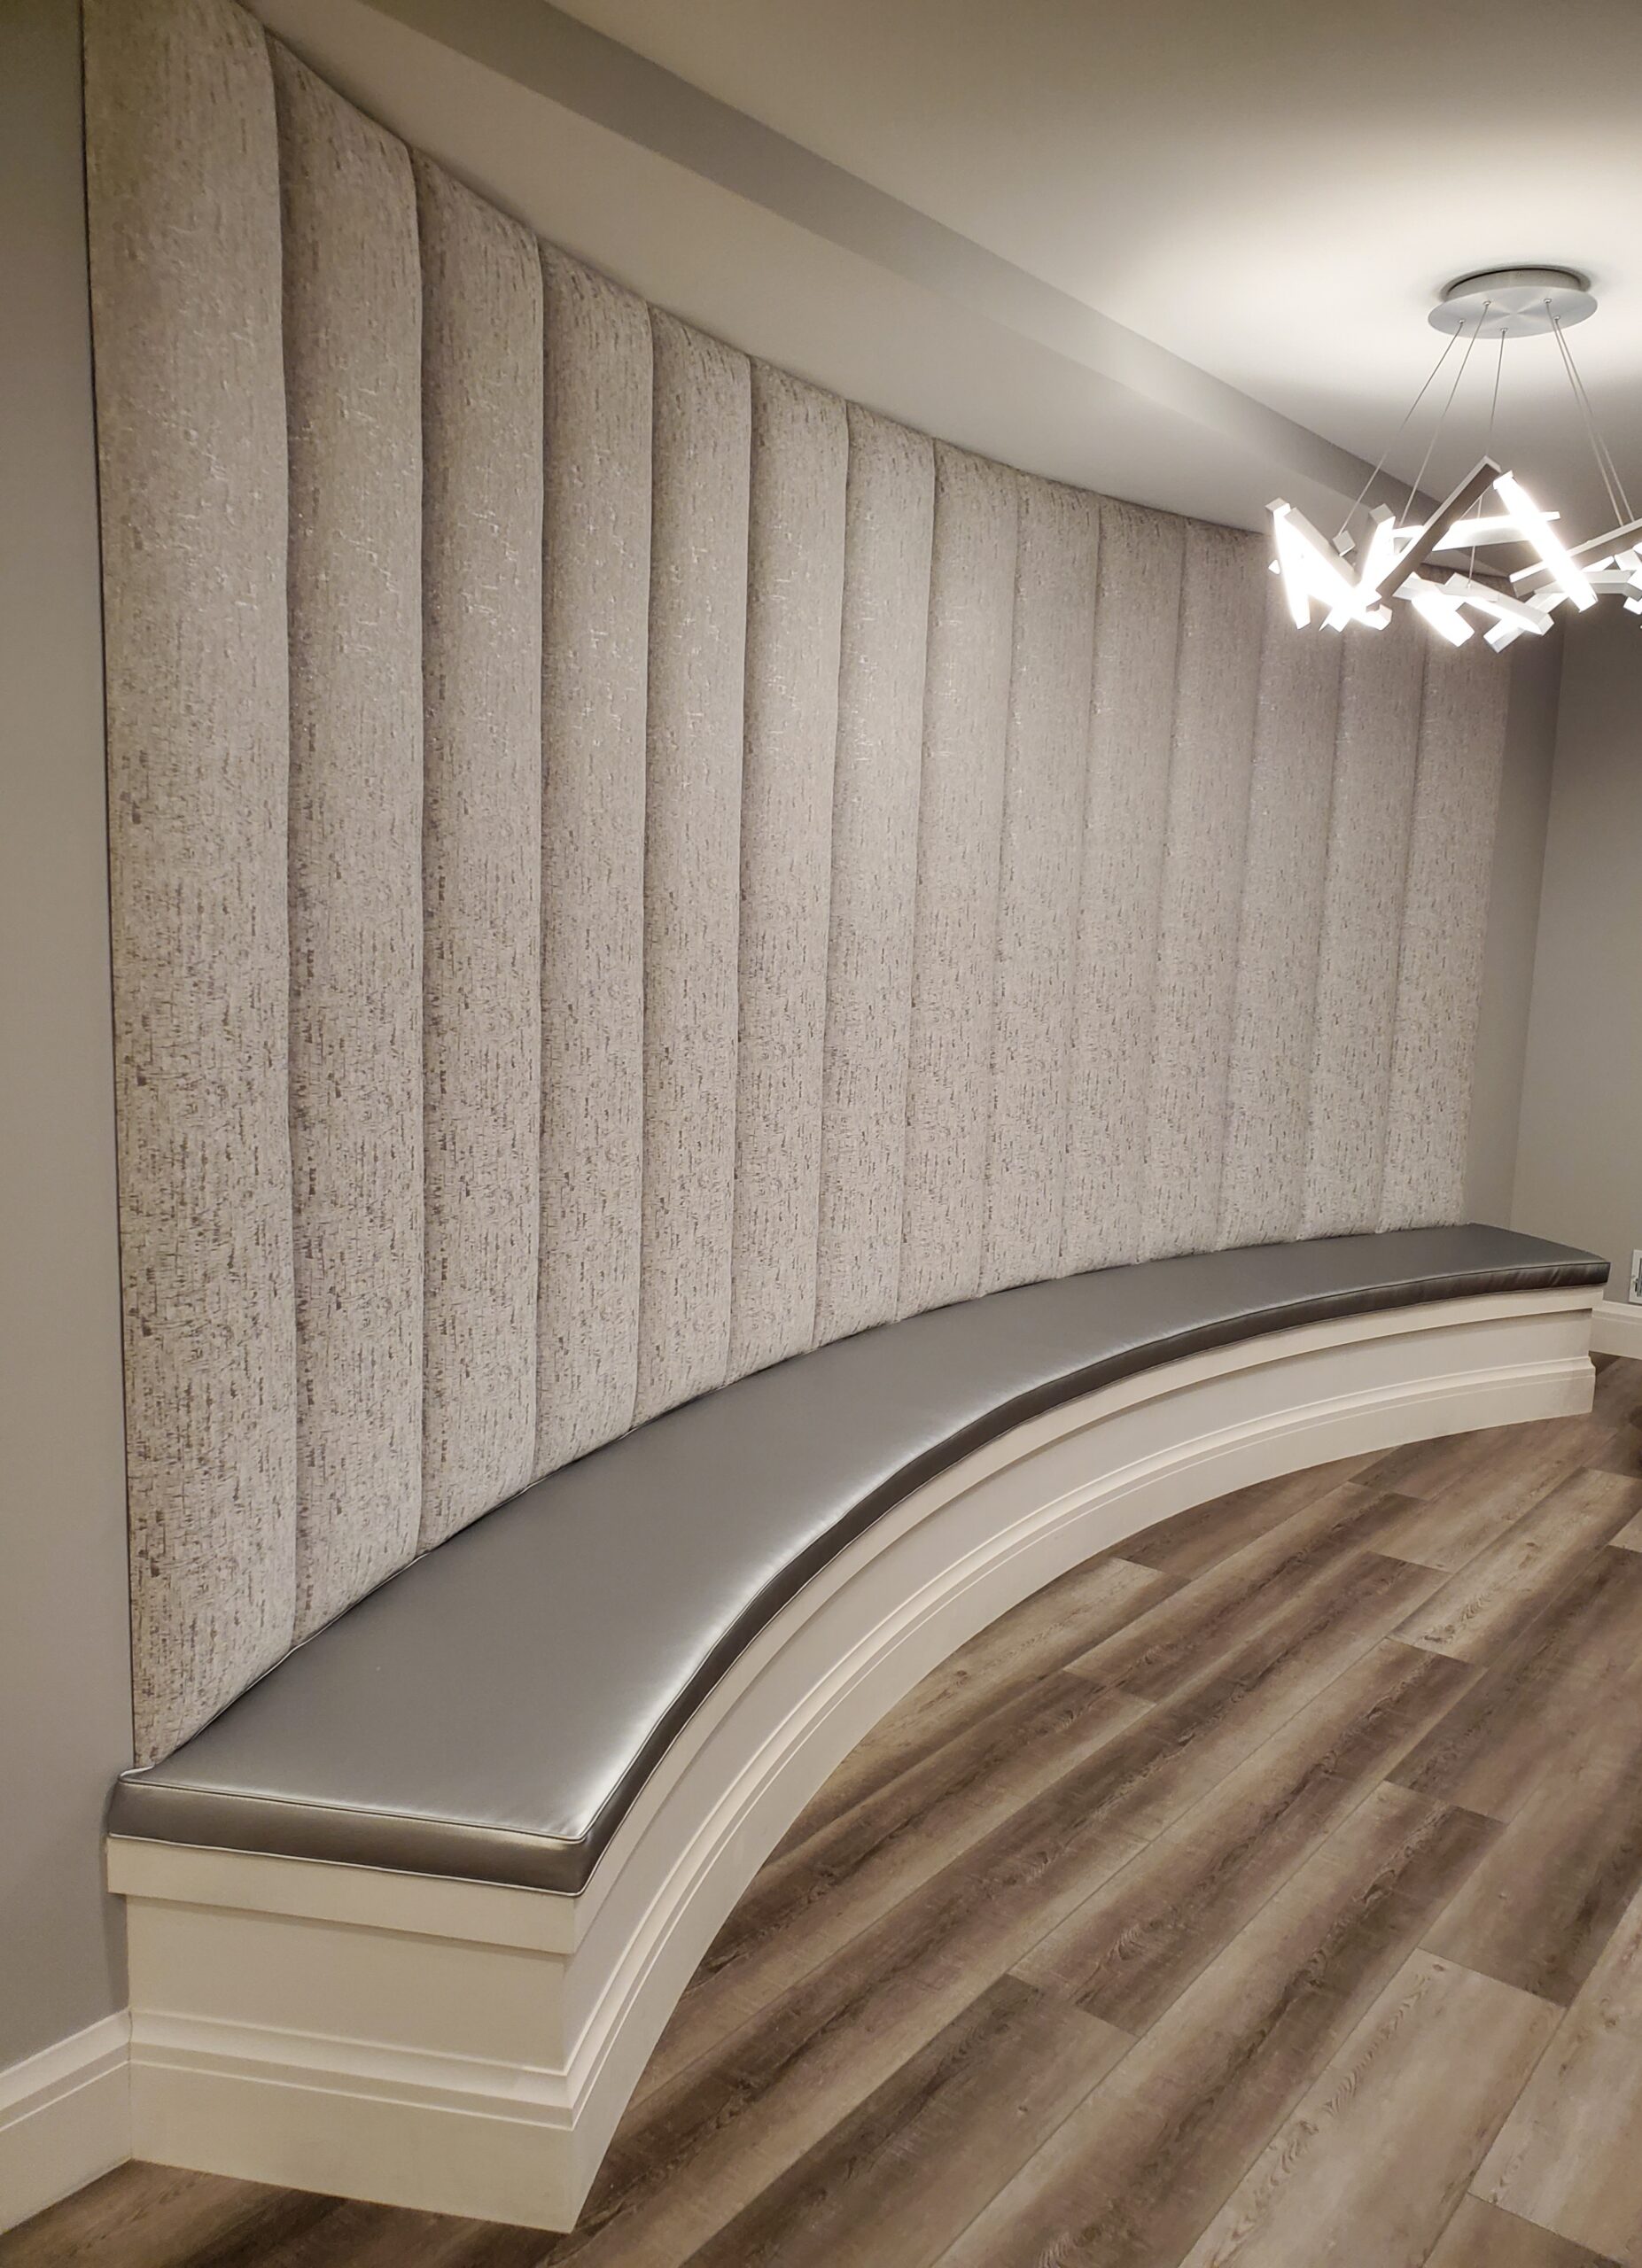 Curved upholster bench with wall panels